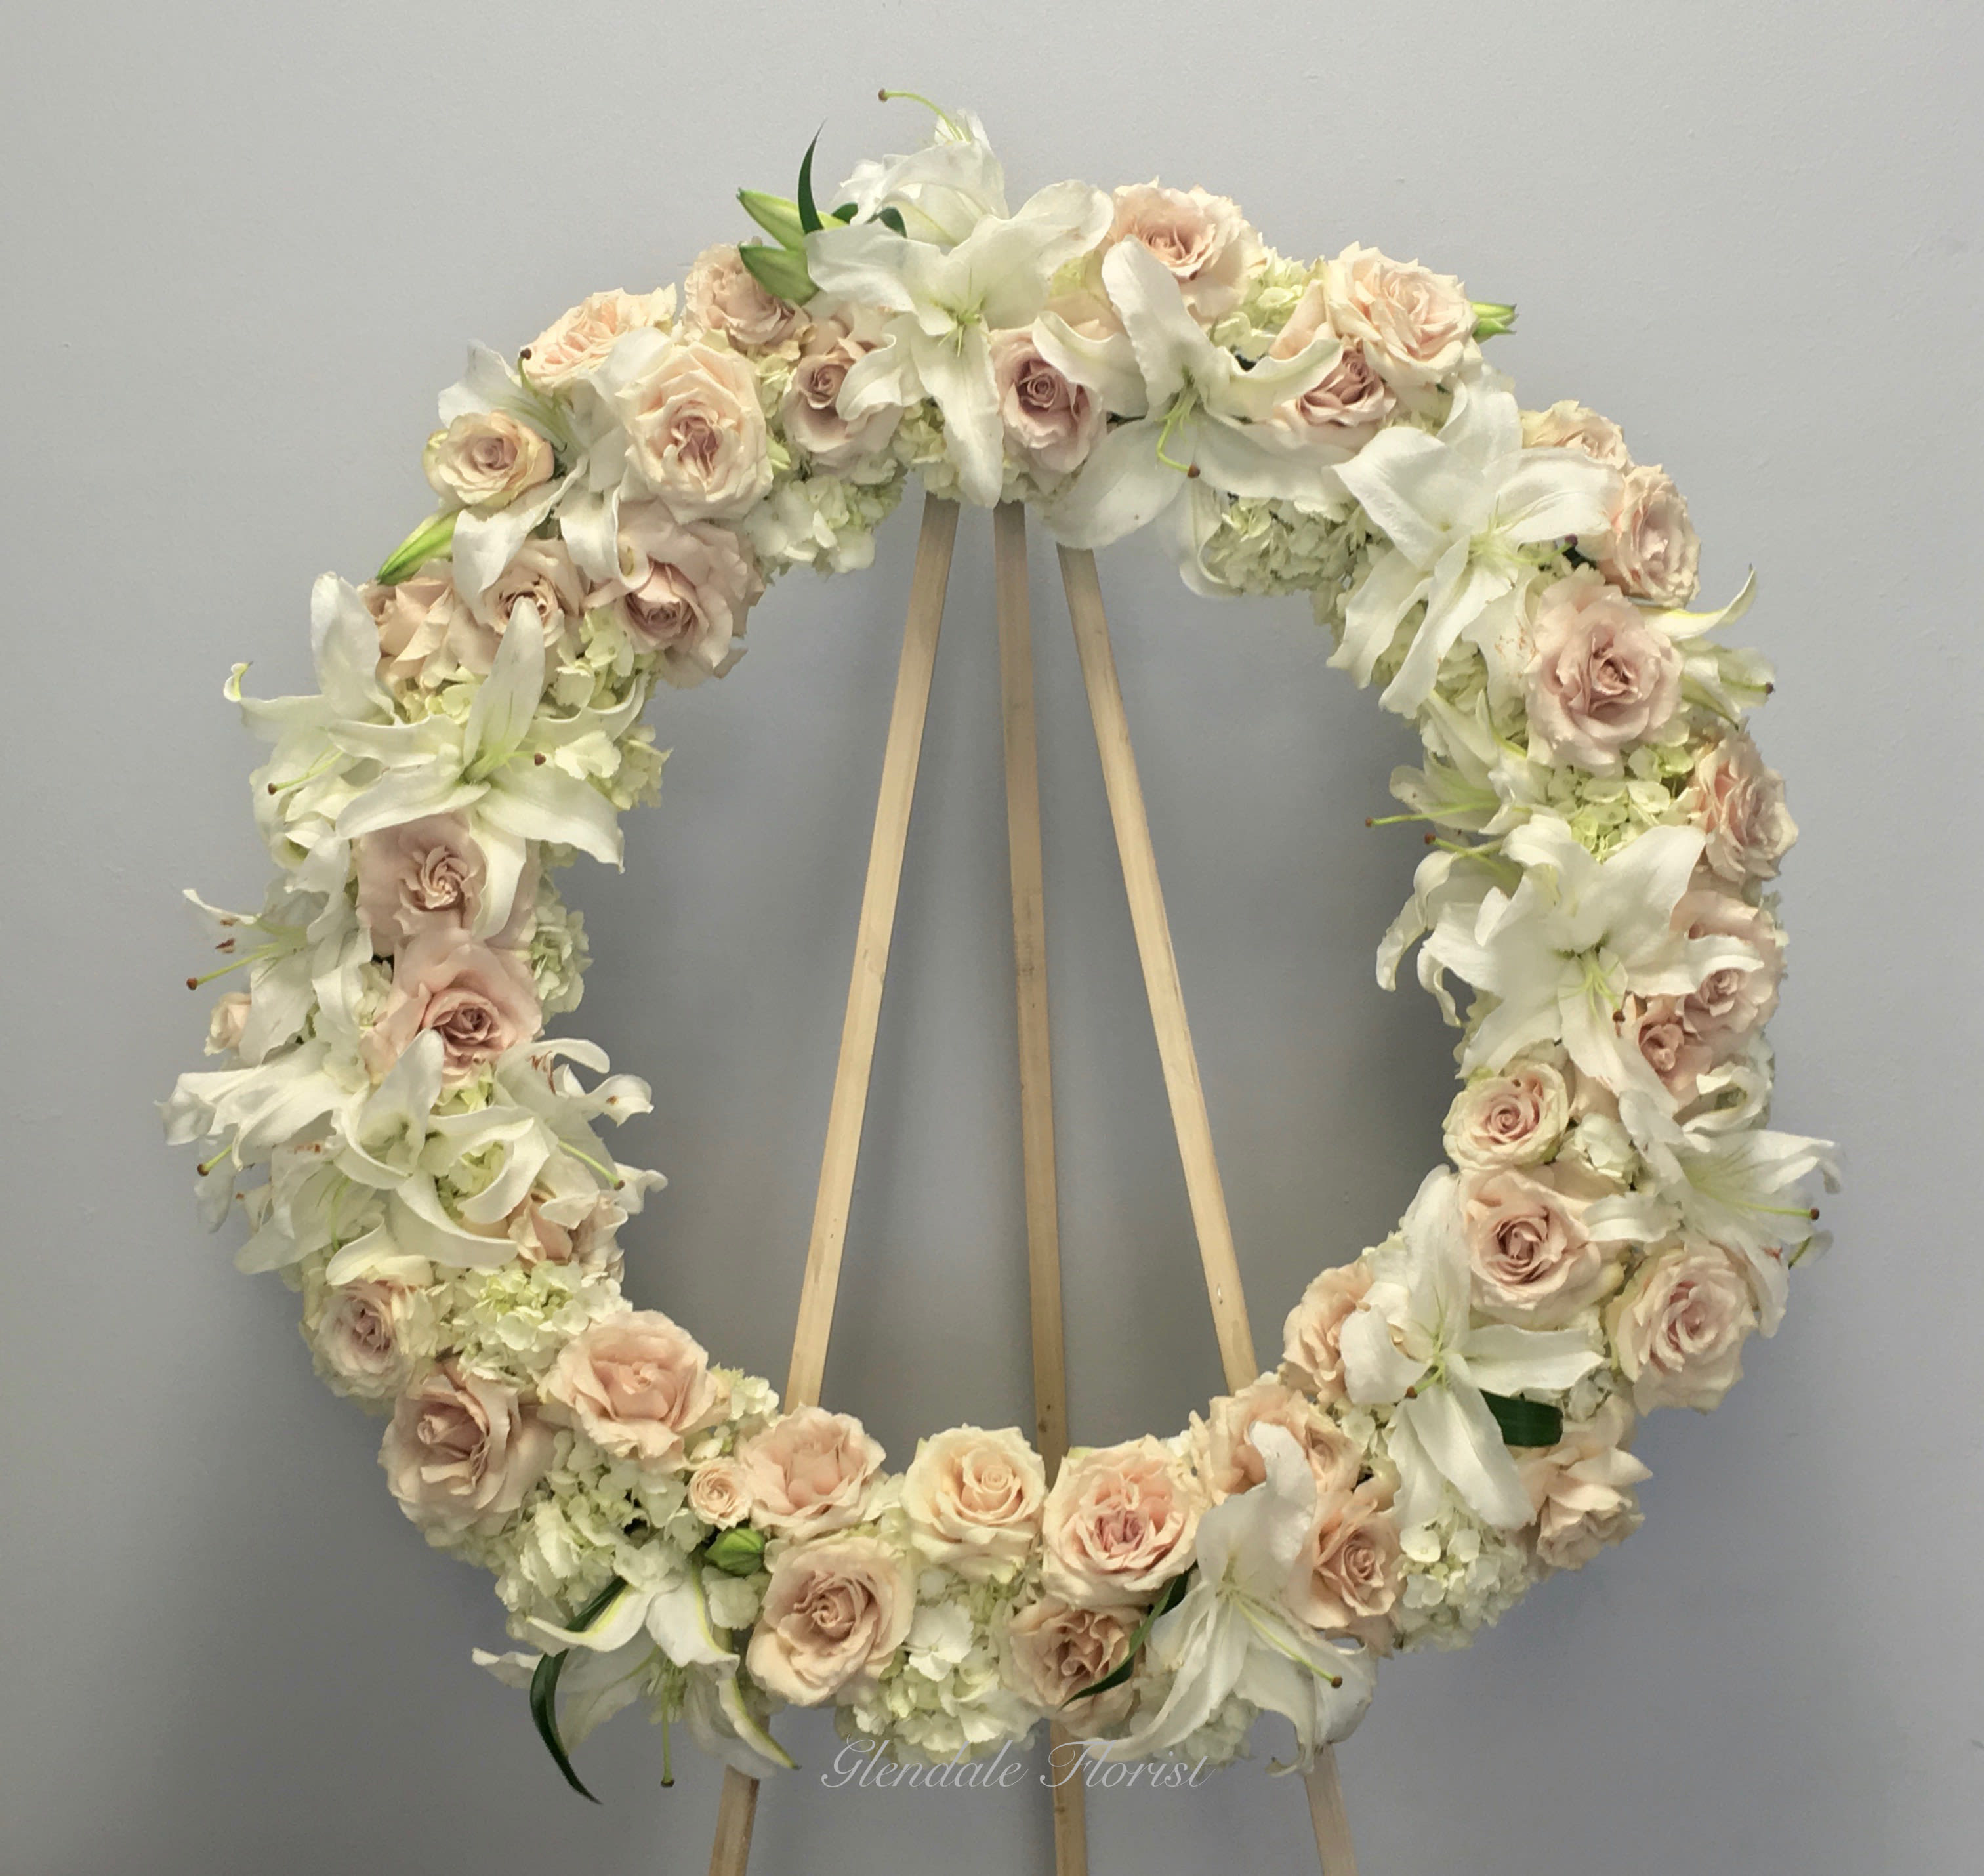 All White Wreath - All White roses, hydrangeas, orchids, and lilies.   We include easel, printed banner and delivery (some fees may apply).  Standard size is 30'', deluxe is 36'', and premium is 42''. 